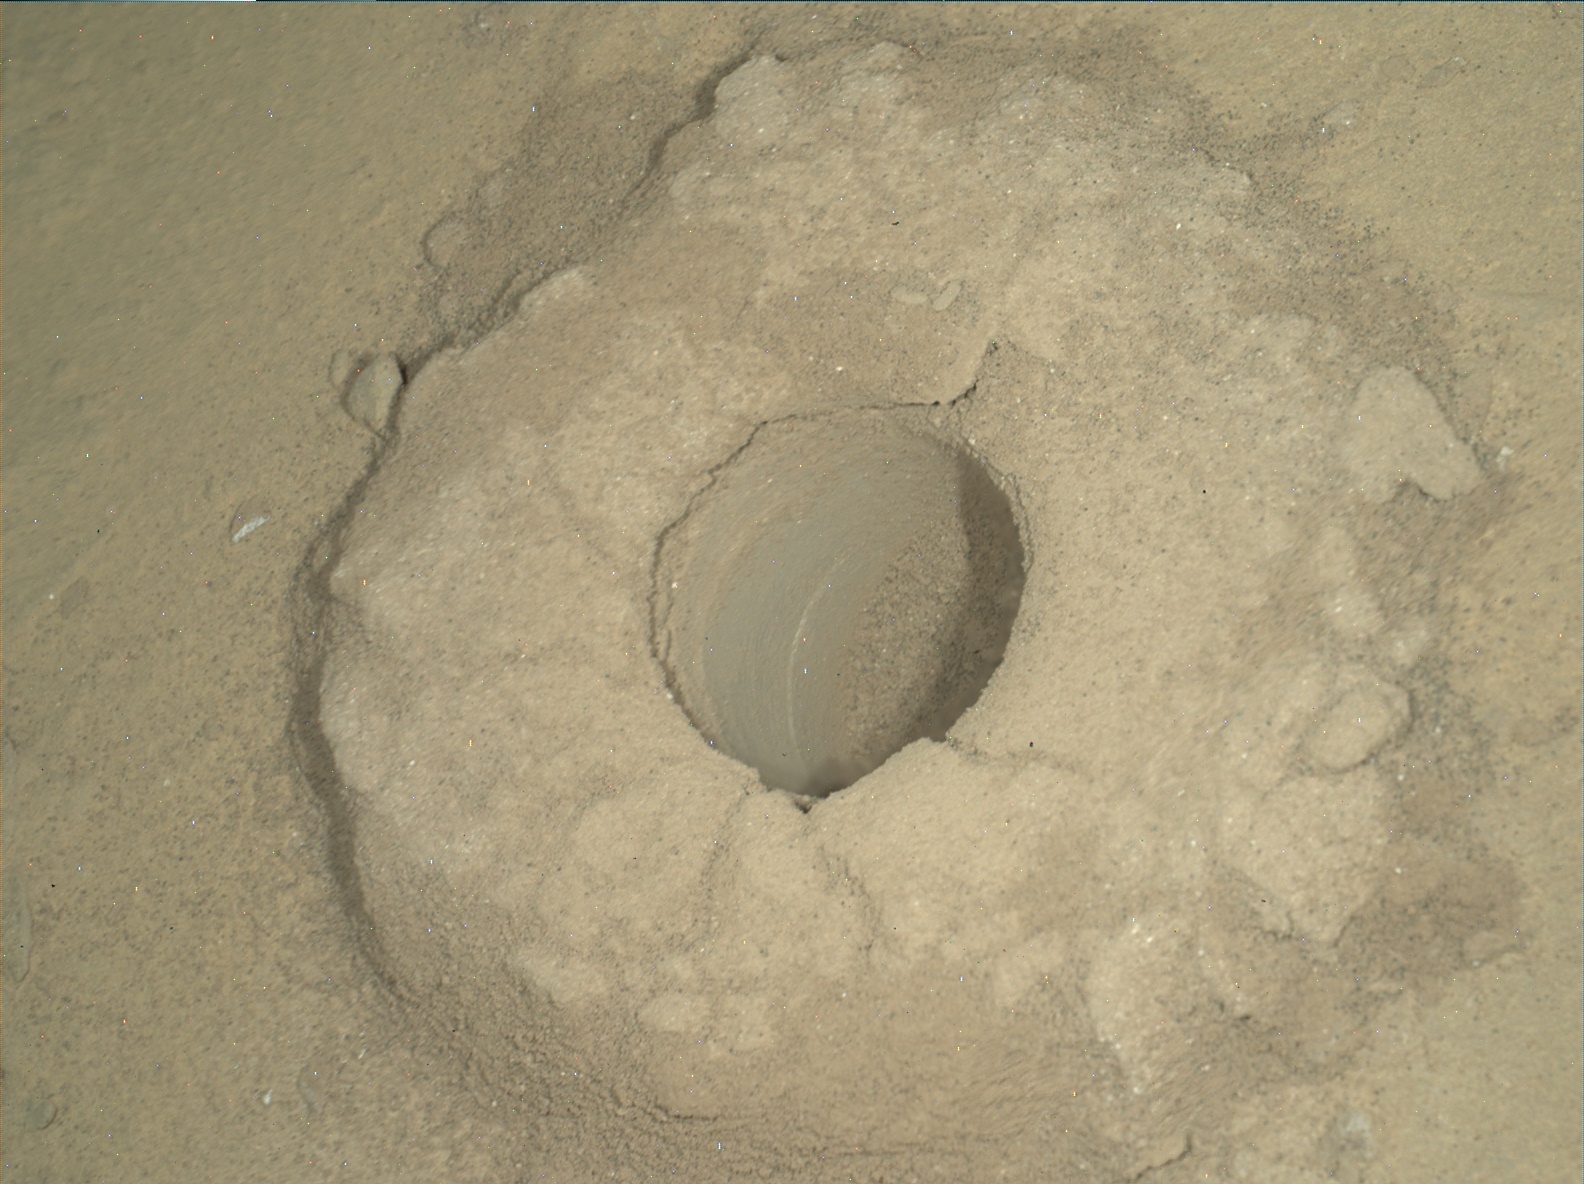 Nasa's Mars rover Curiosity acquired this image using its Mars Hand Lens Imager (MAHLI) on Sol 1472